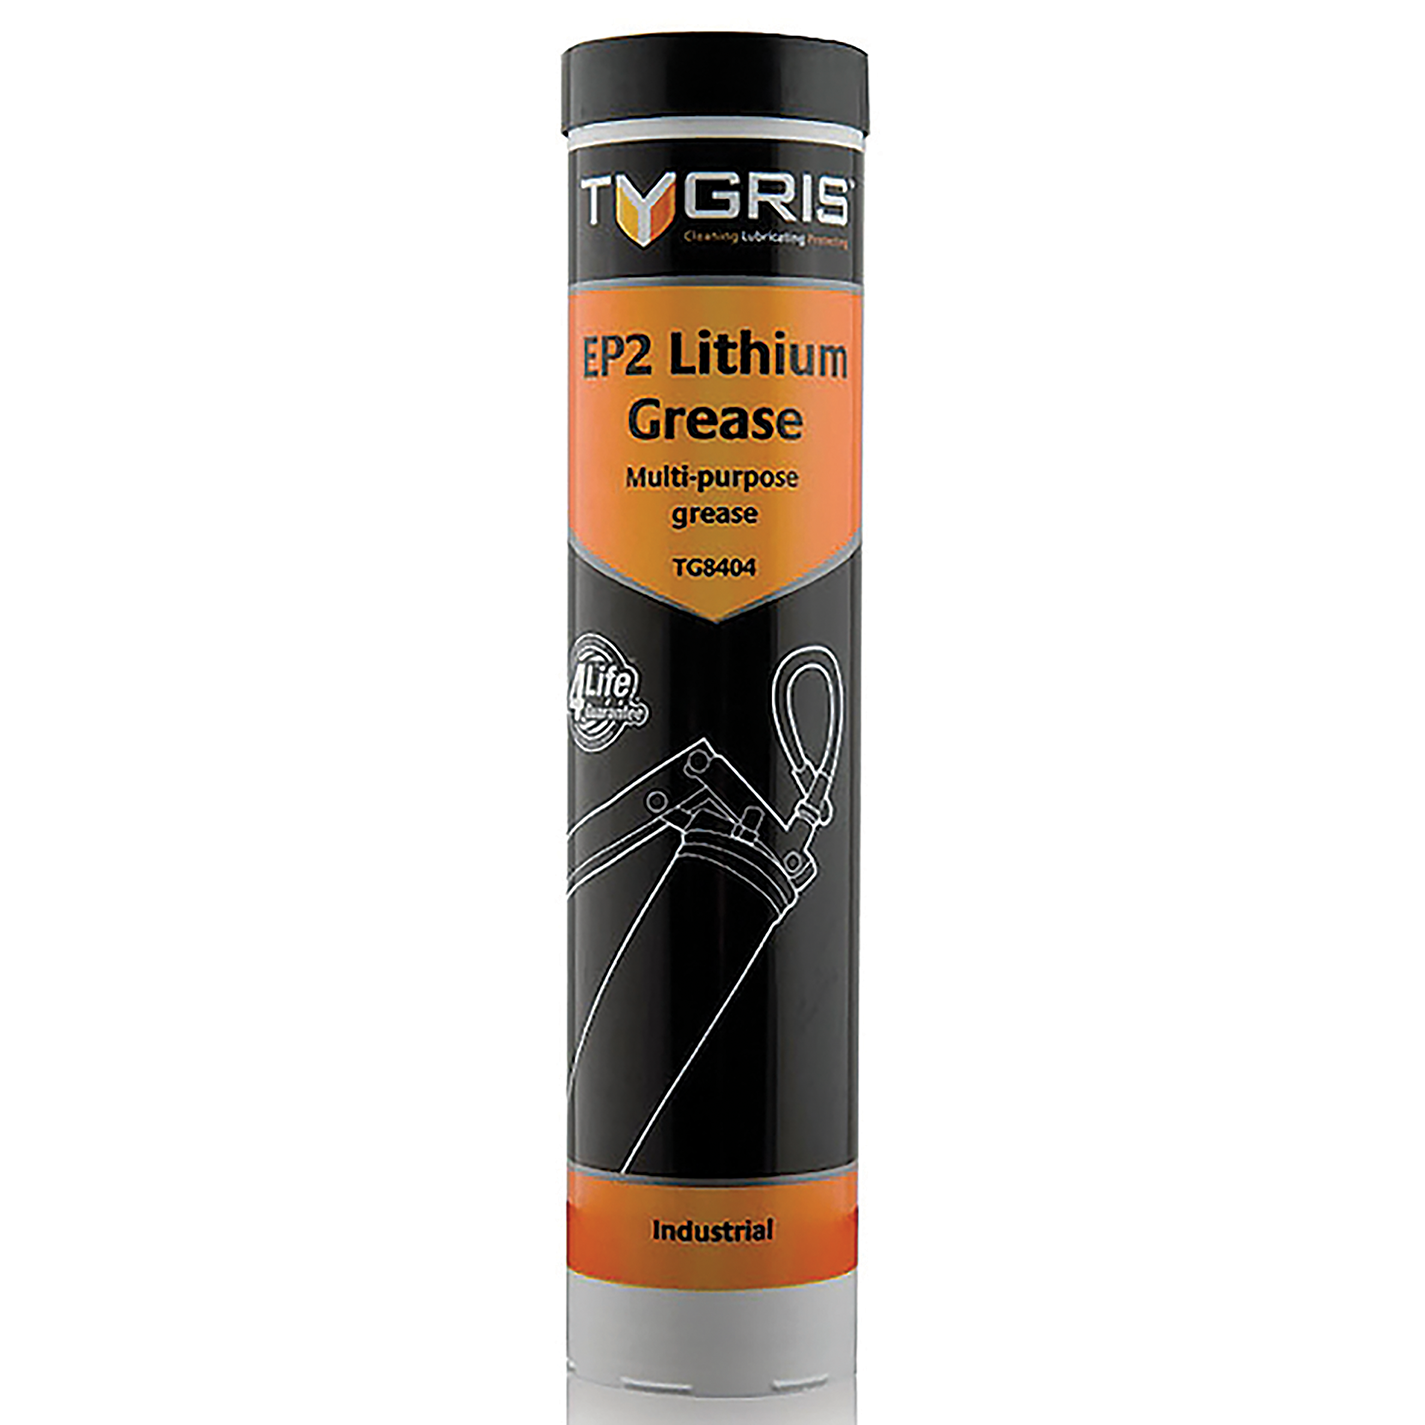 EP2 LITHIUM GREASE